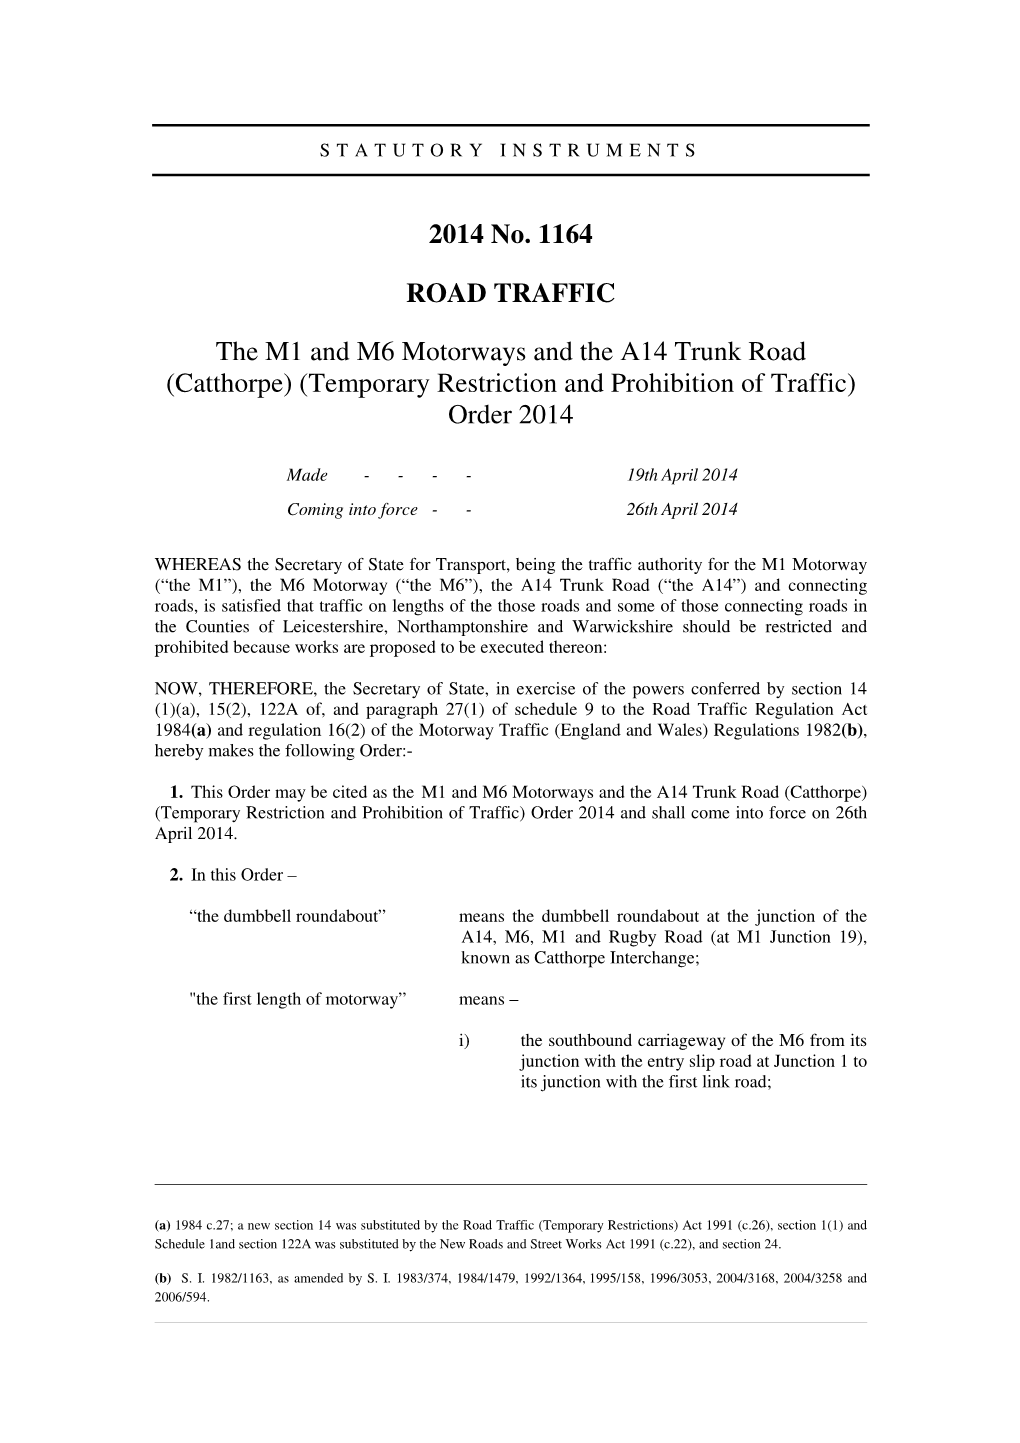 The M1 and M6 Motorways and the A14 Trunk Road (Catthorpe) (Temporary Restriction and Prohibition of Traffic) Order 2014